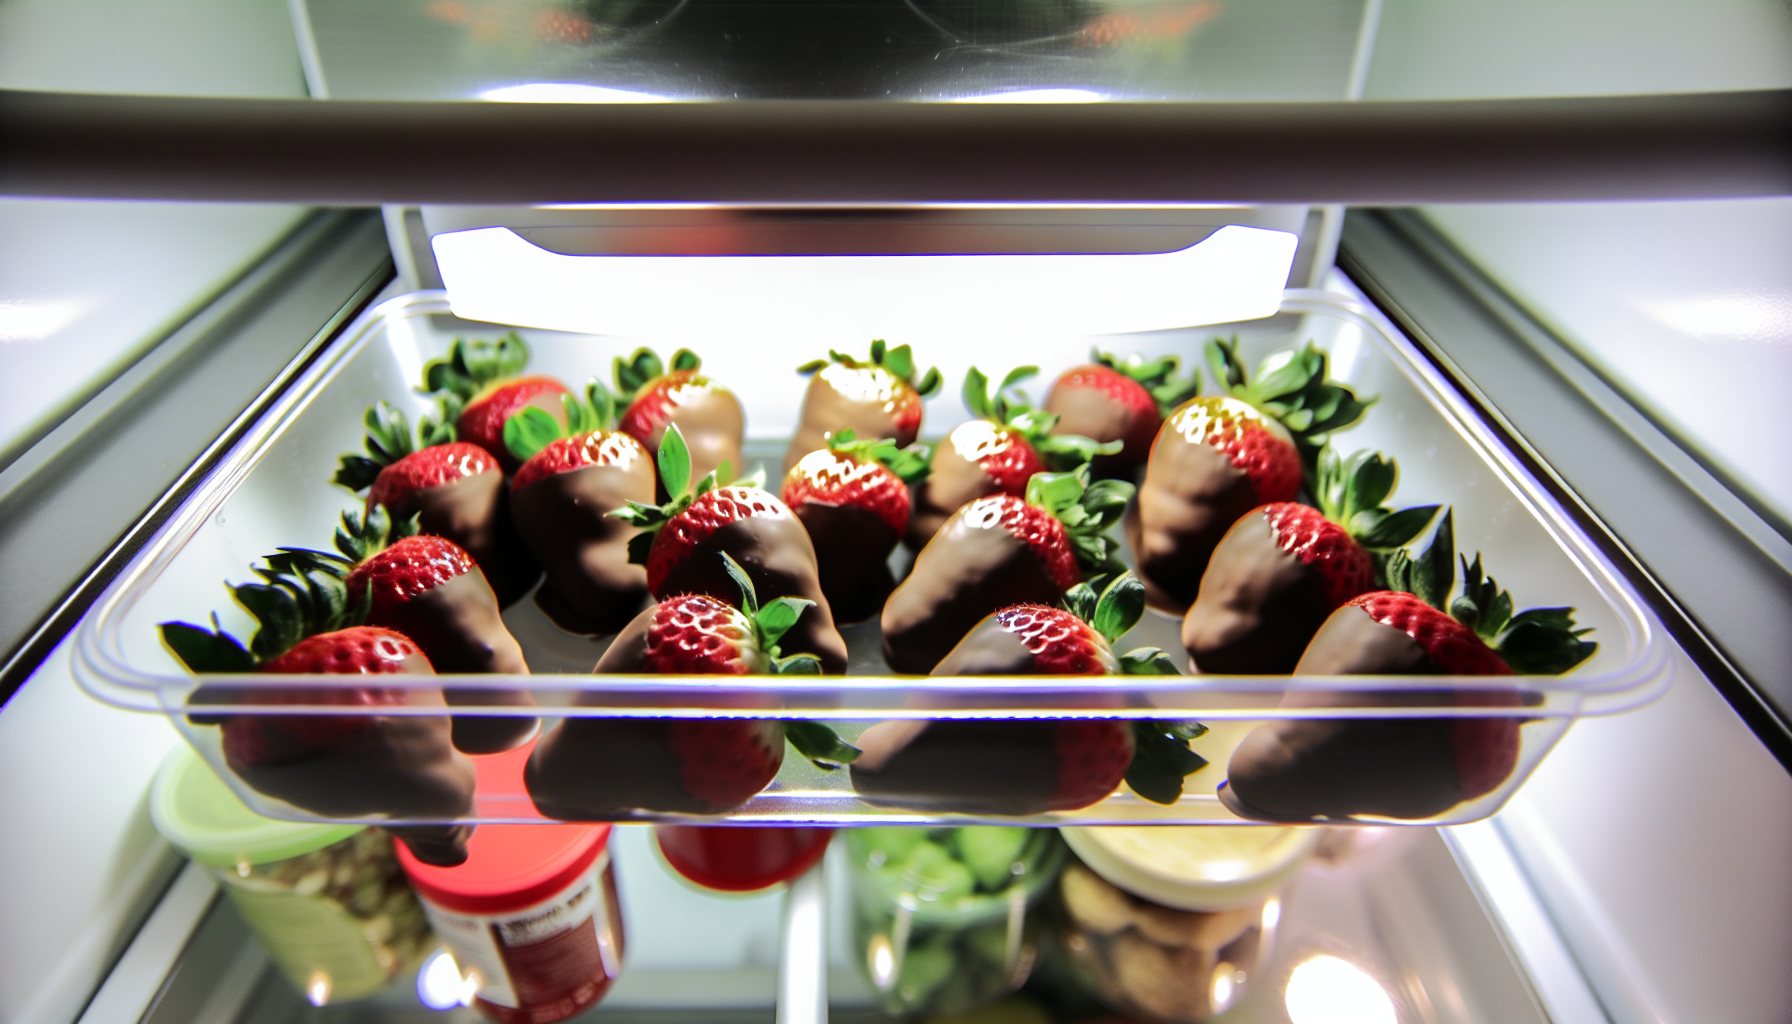 Storing chocolate-covered strawberries in an airtight container in the refrigerator